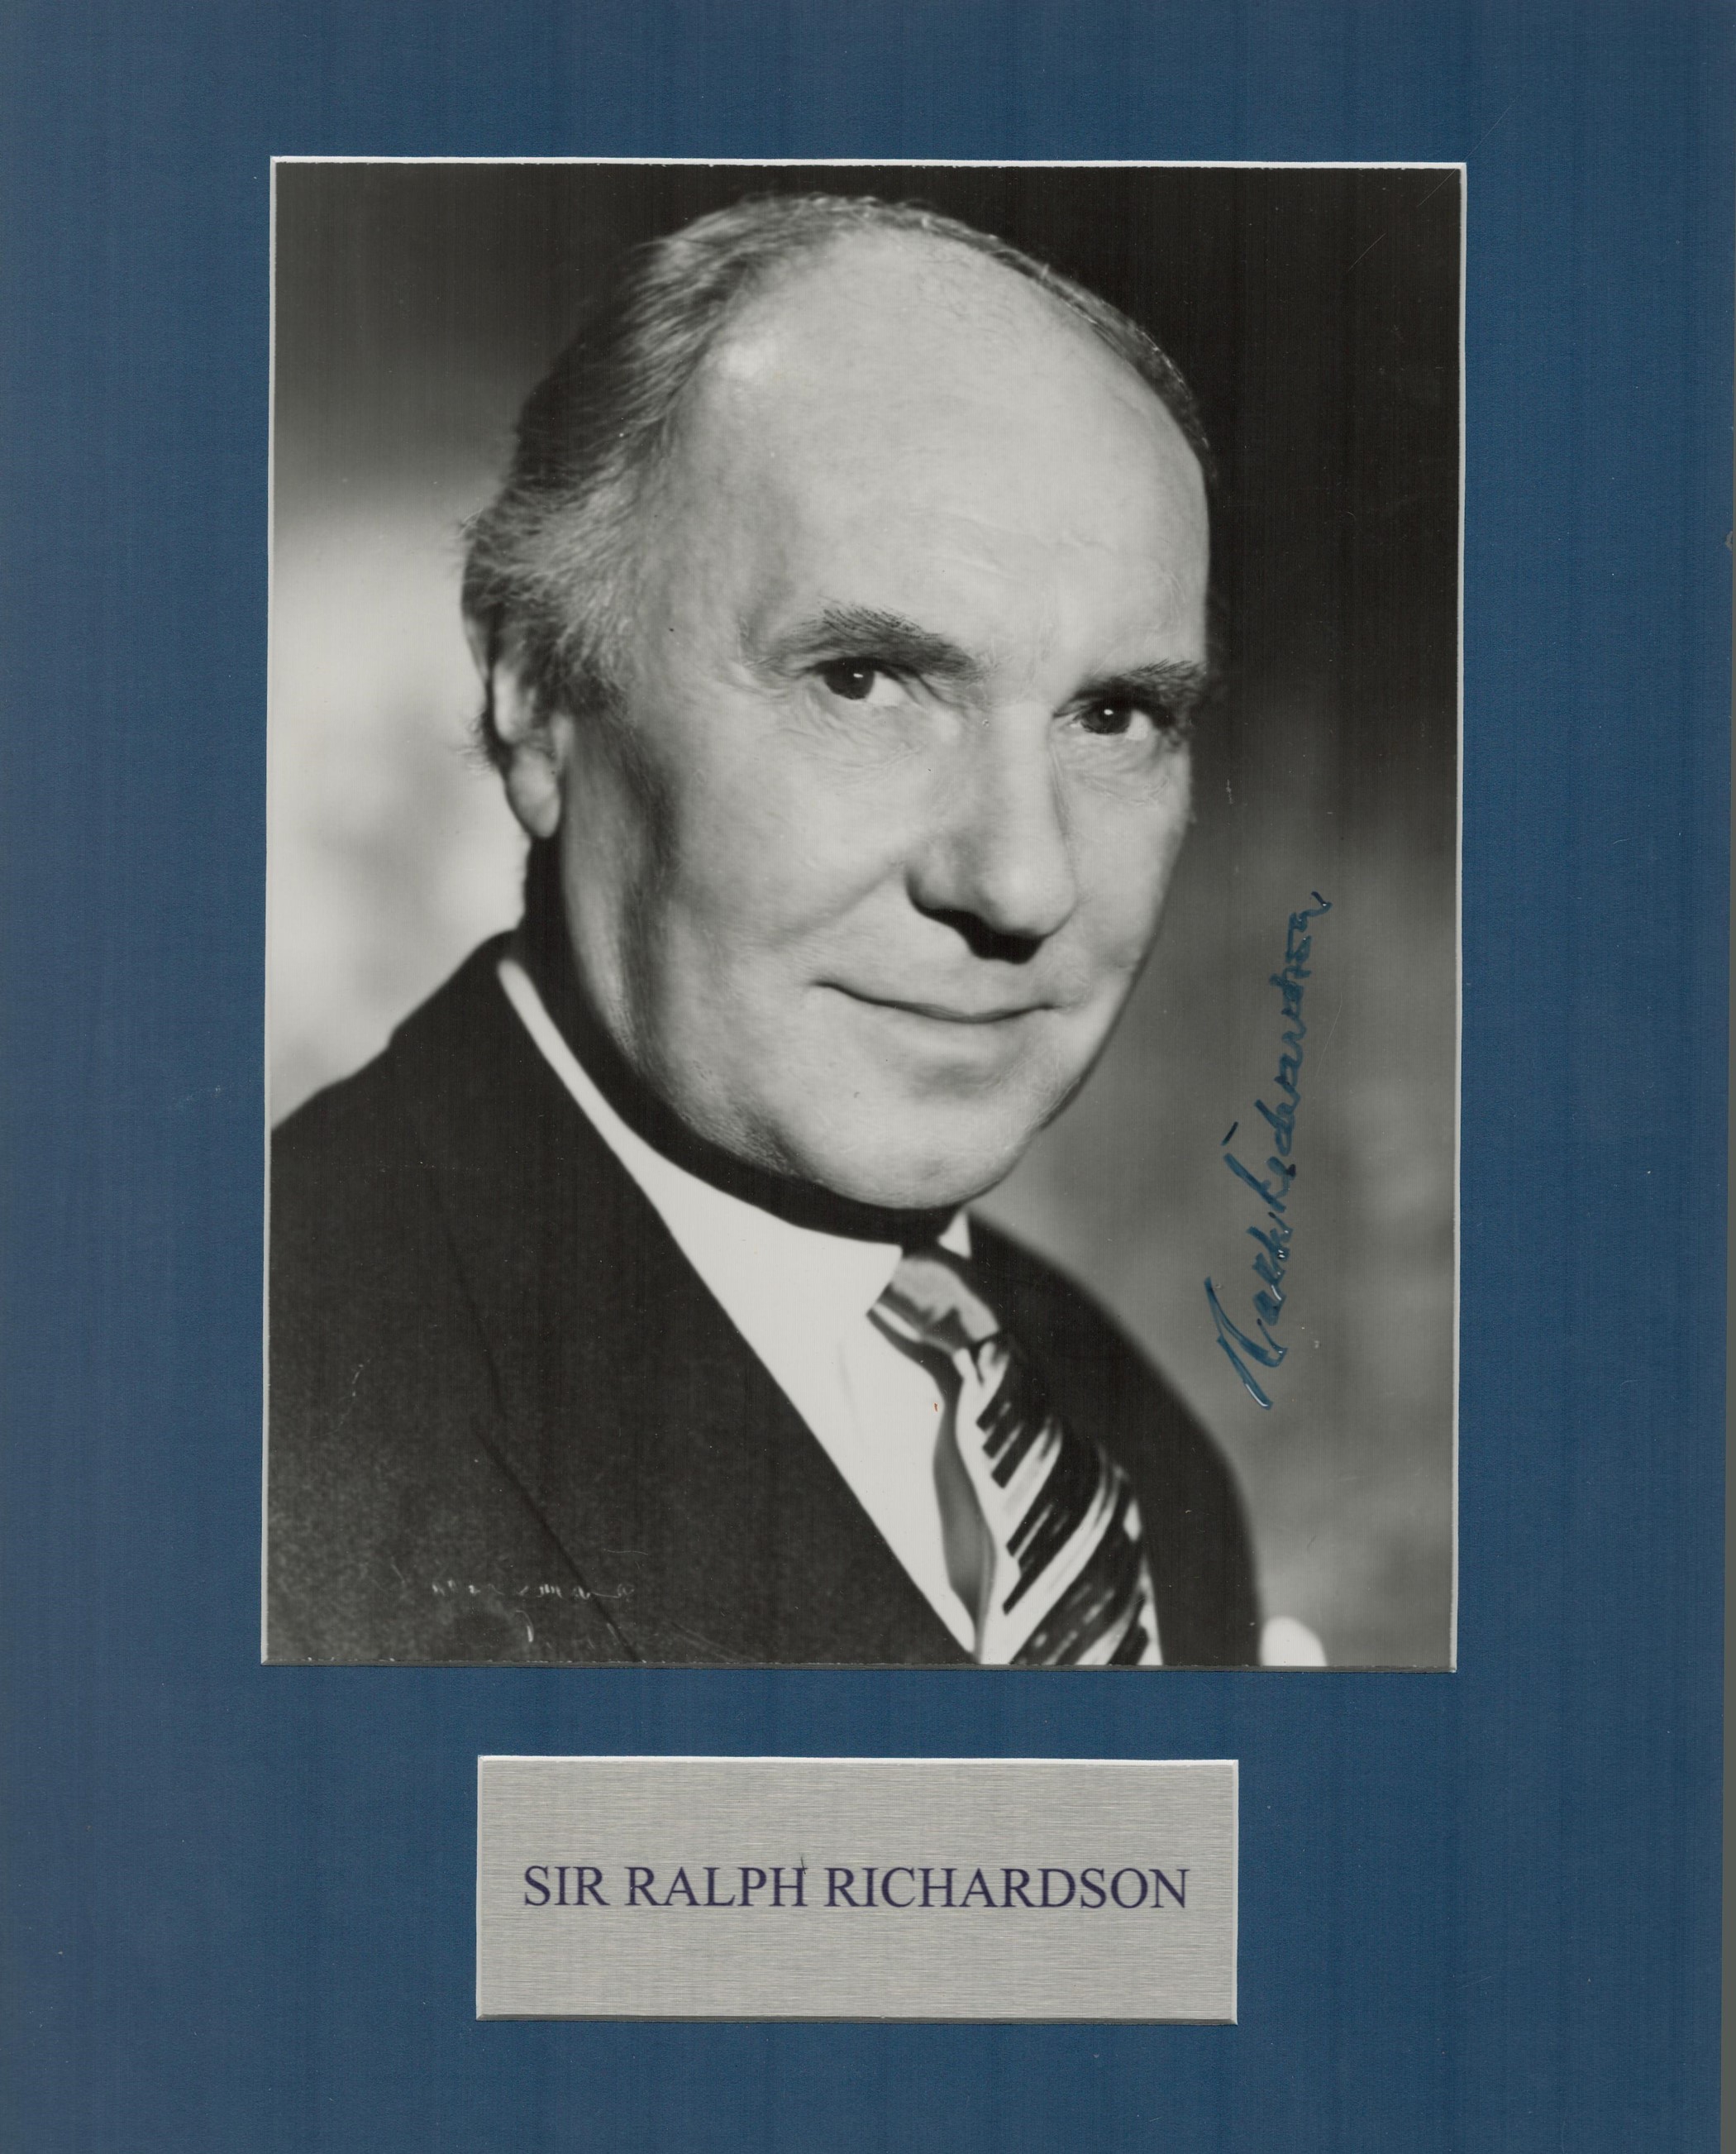 Sir Ralph Richardson signed 14x11 inch mounted black and white photo. Good condition. All autographs